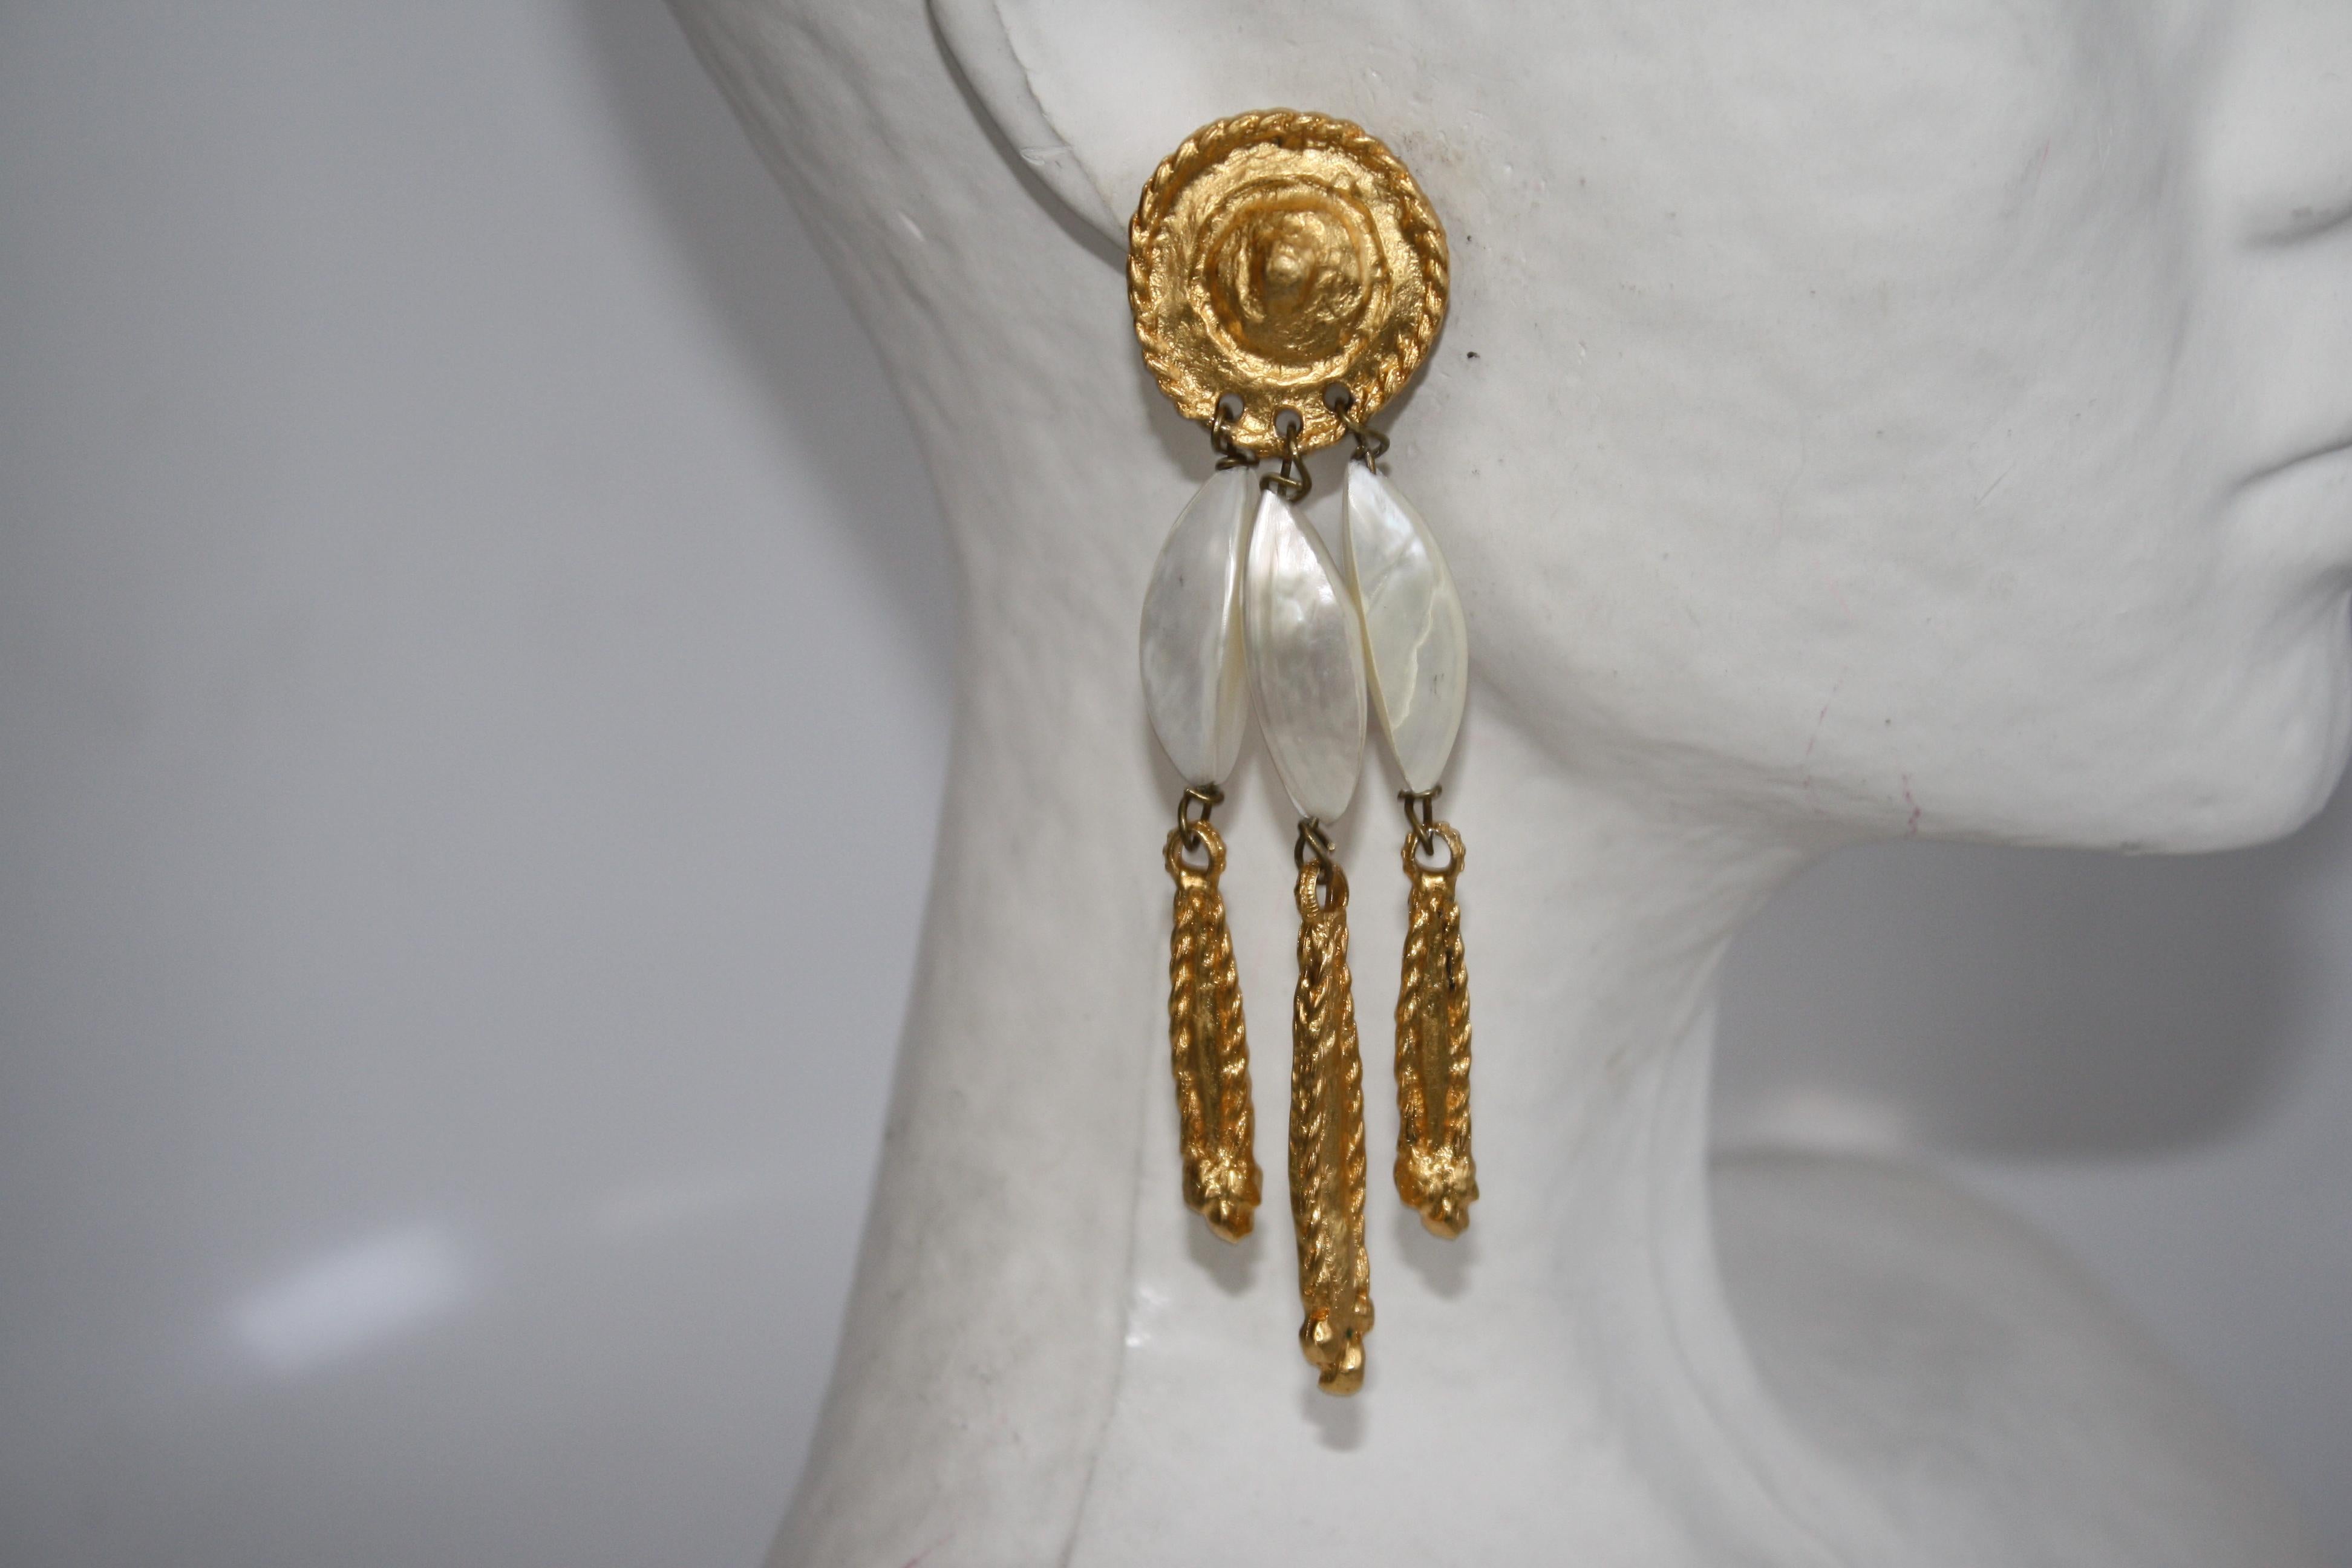 Handmade in Paris, France gilded bronze and baroque mother of pearl clip earrings from Carole Saint Germes.